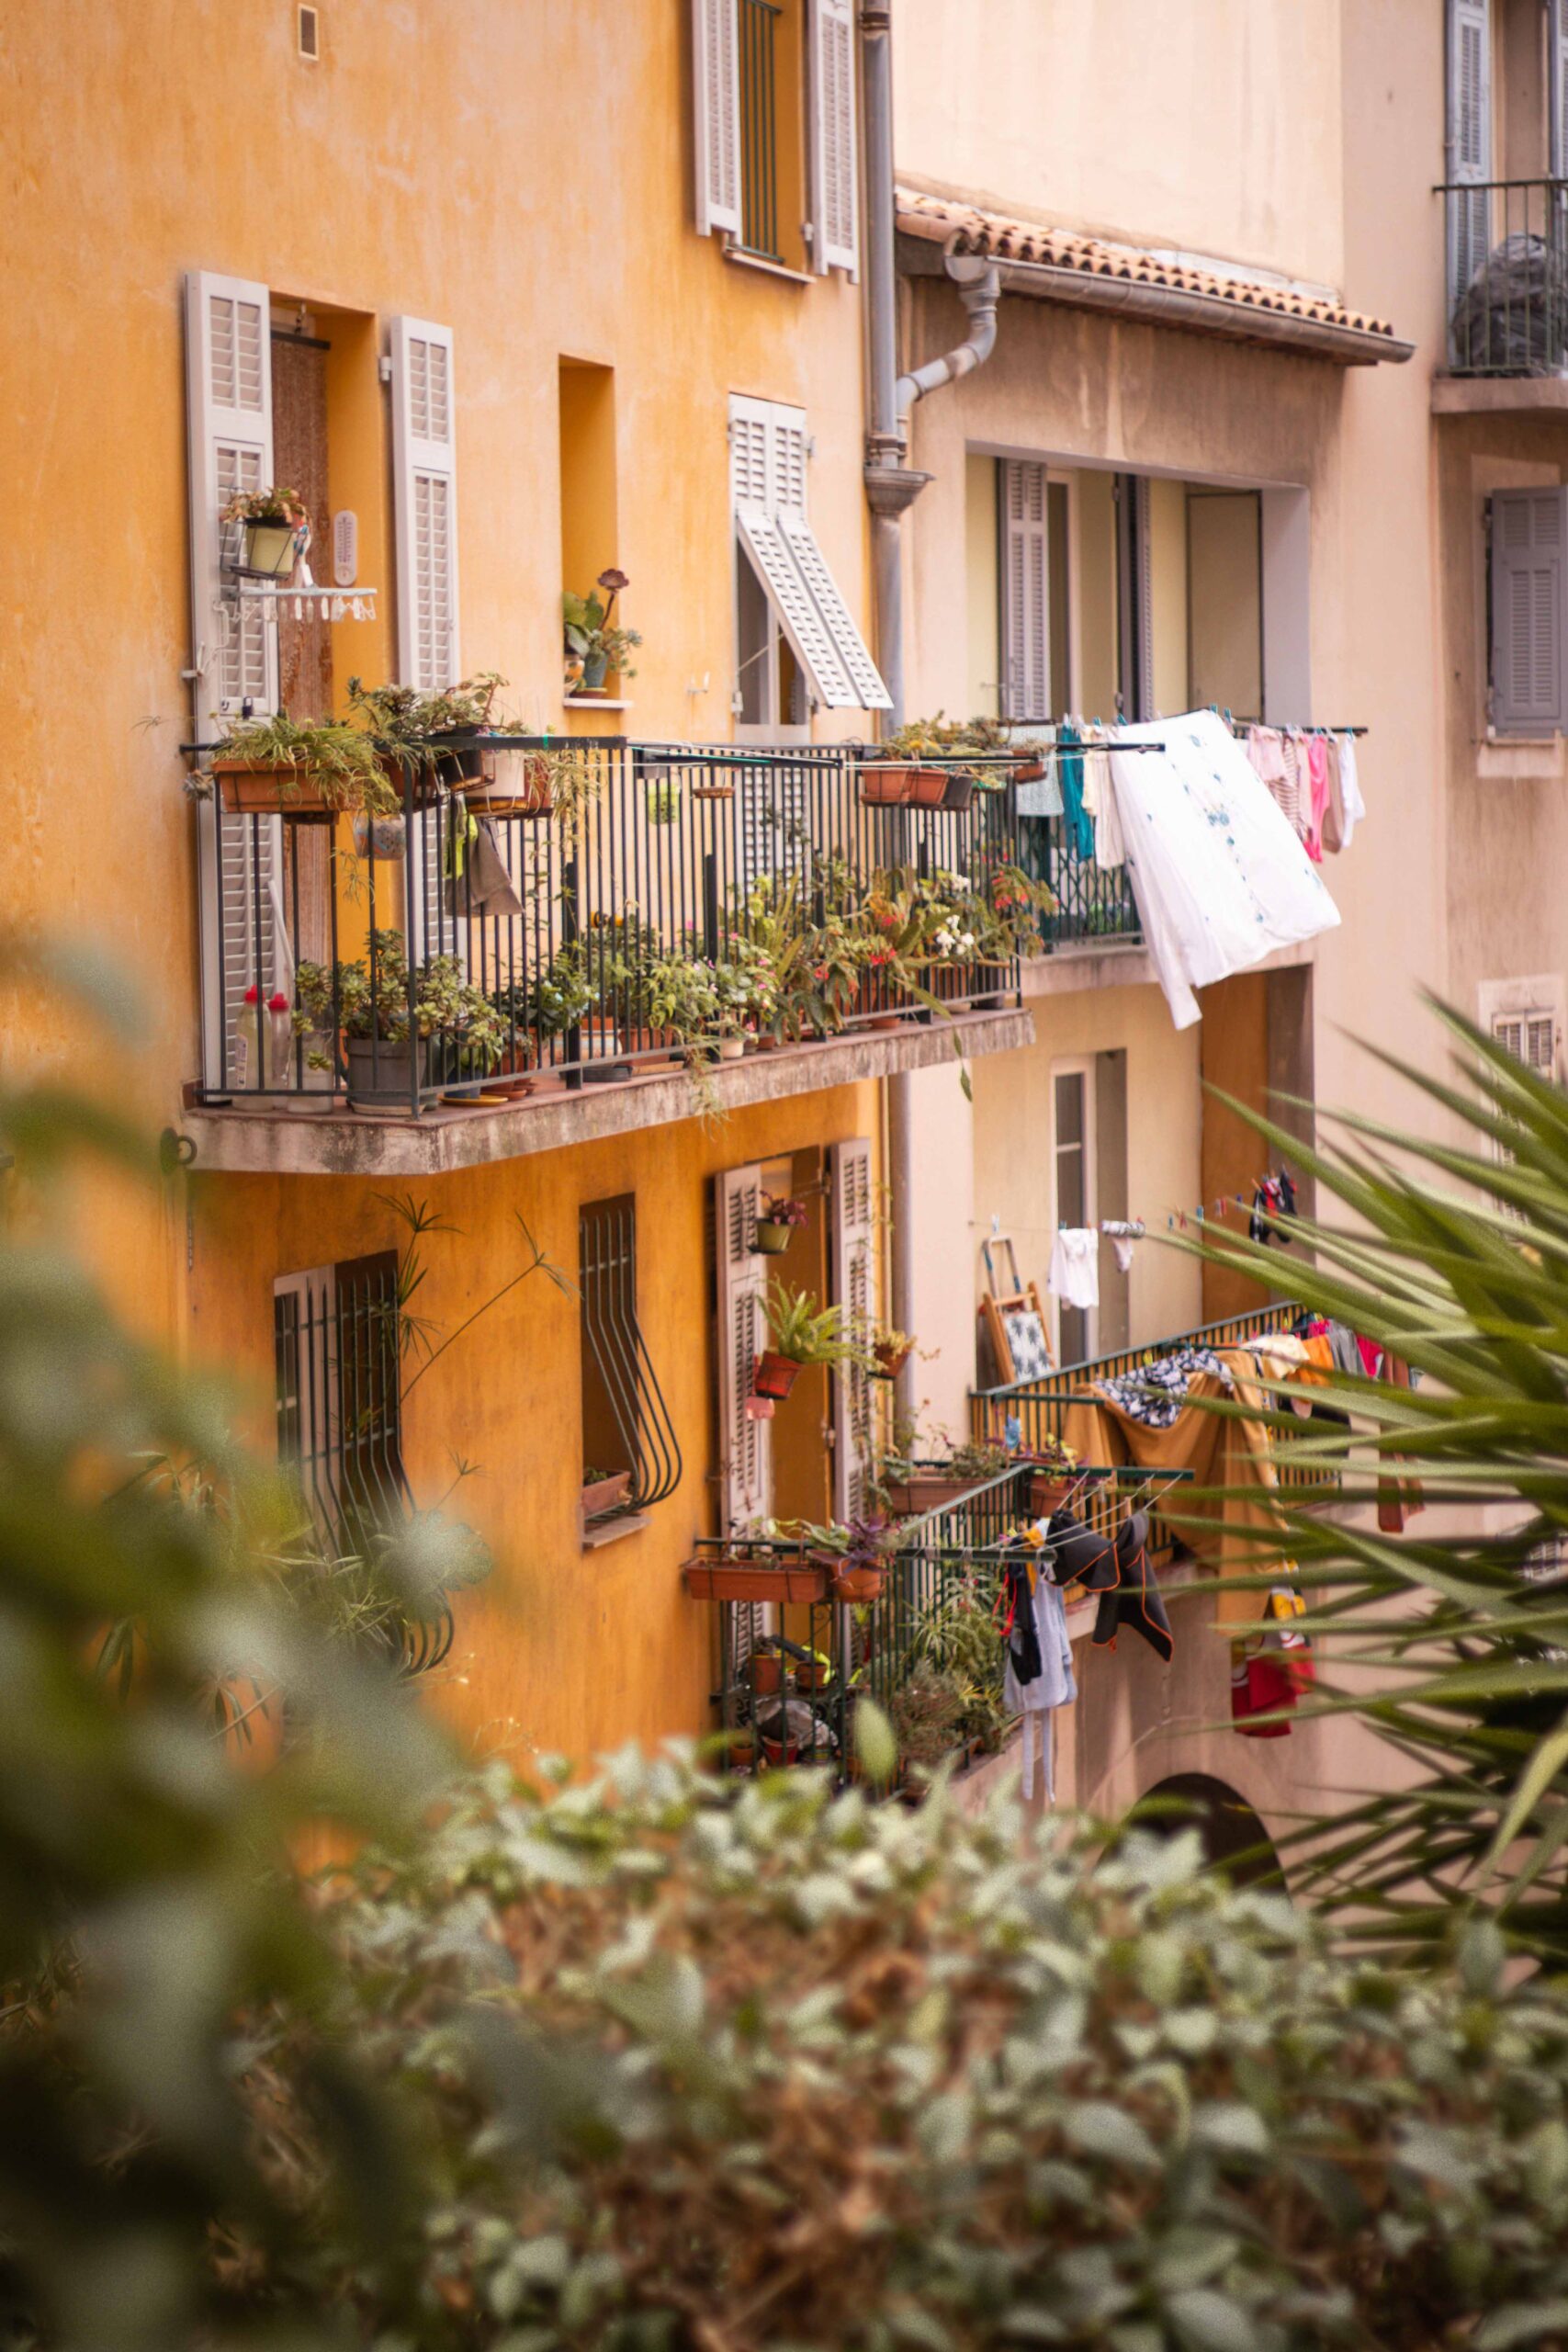 Hanging clothes drying and plants on the balcony of colourful buildings with orange and beige facades in the Old Town of Nice (Vieux-Nice) in Nice, France